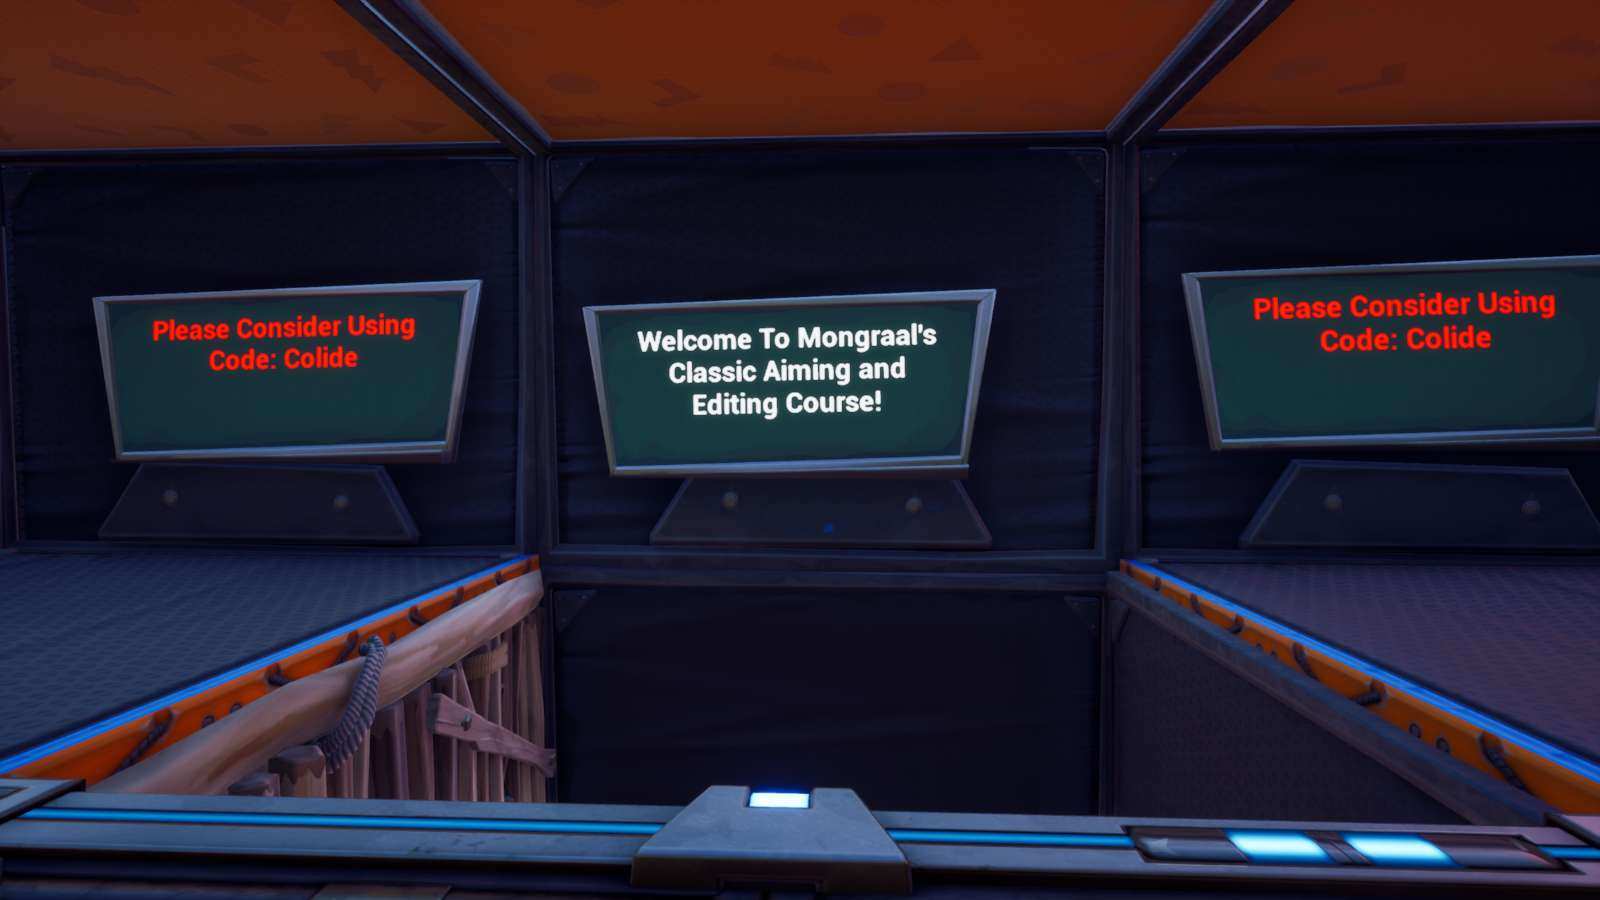 MONGRAAL CLASSIC AIM AND EDIT COURSE!